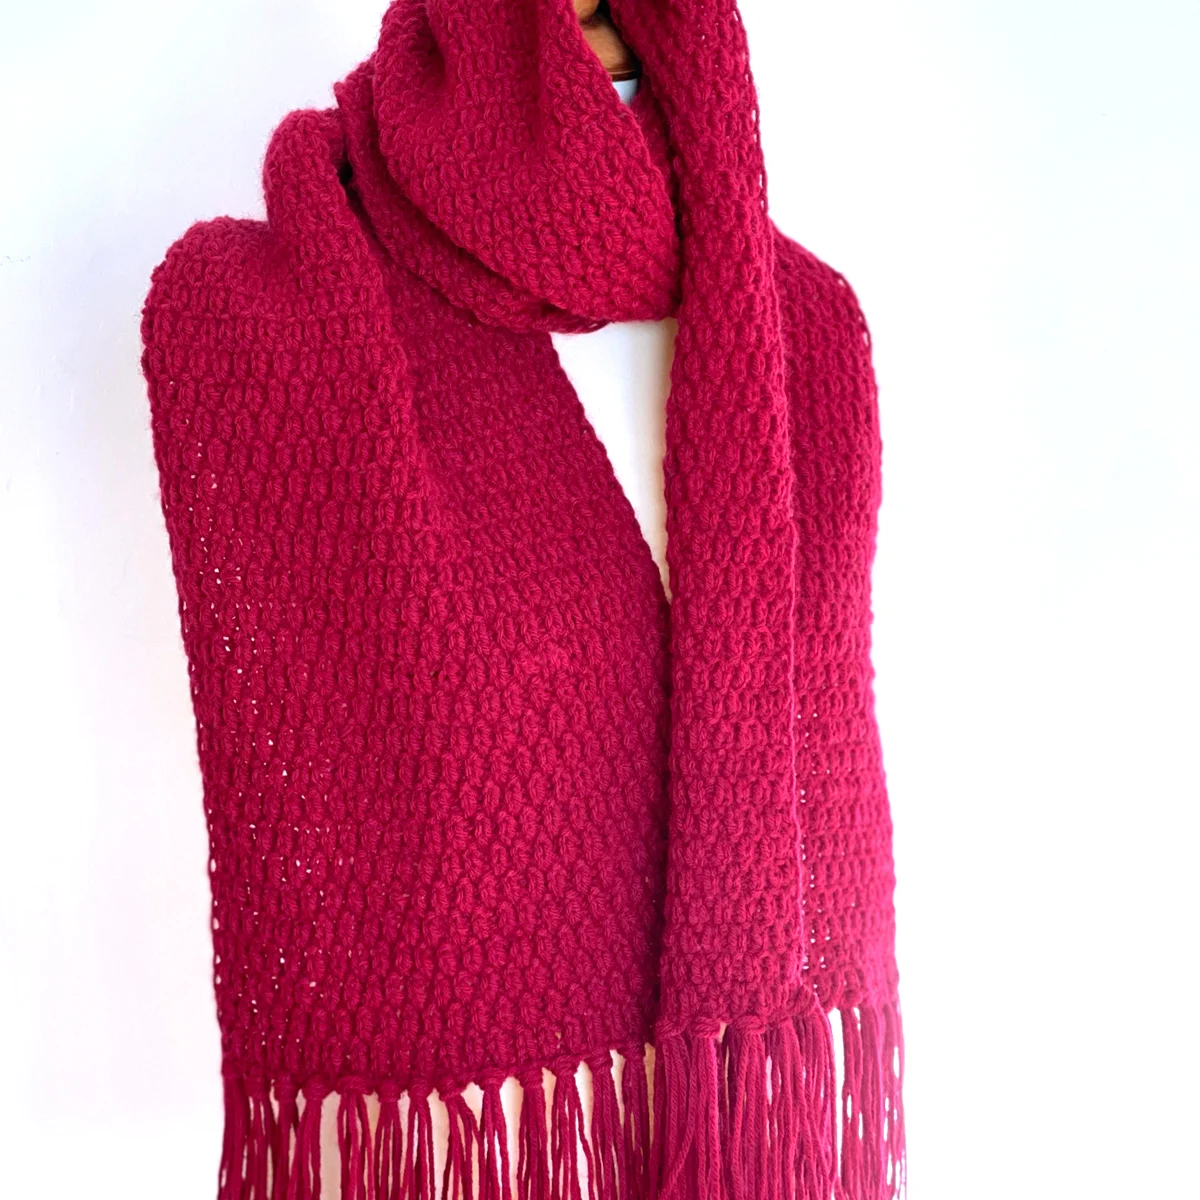 The Poet Scarf Knitting Pattern